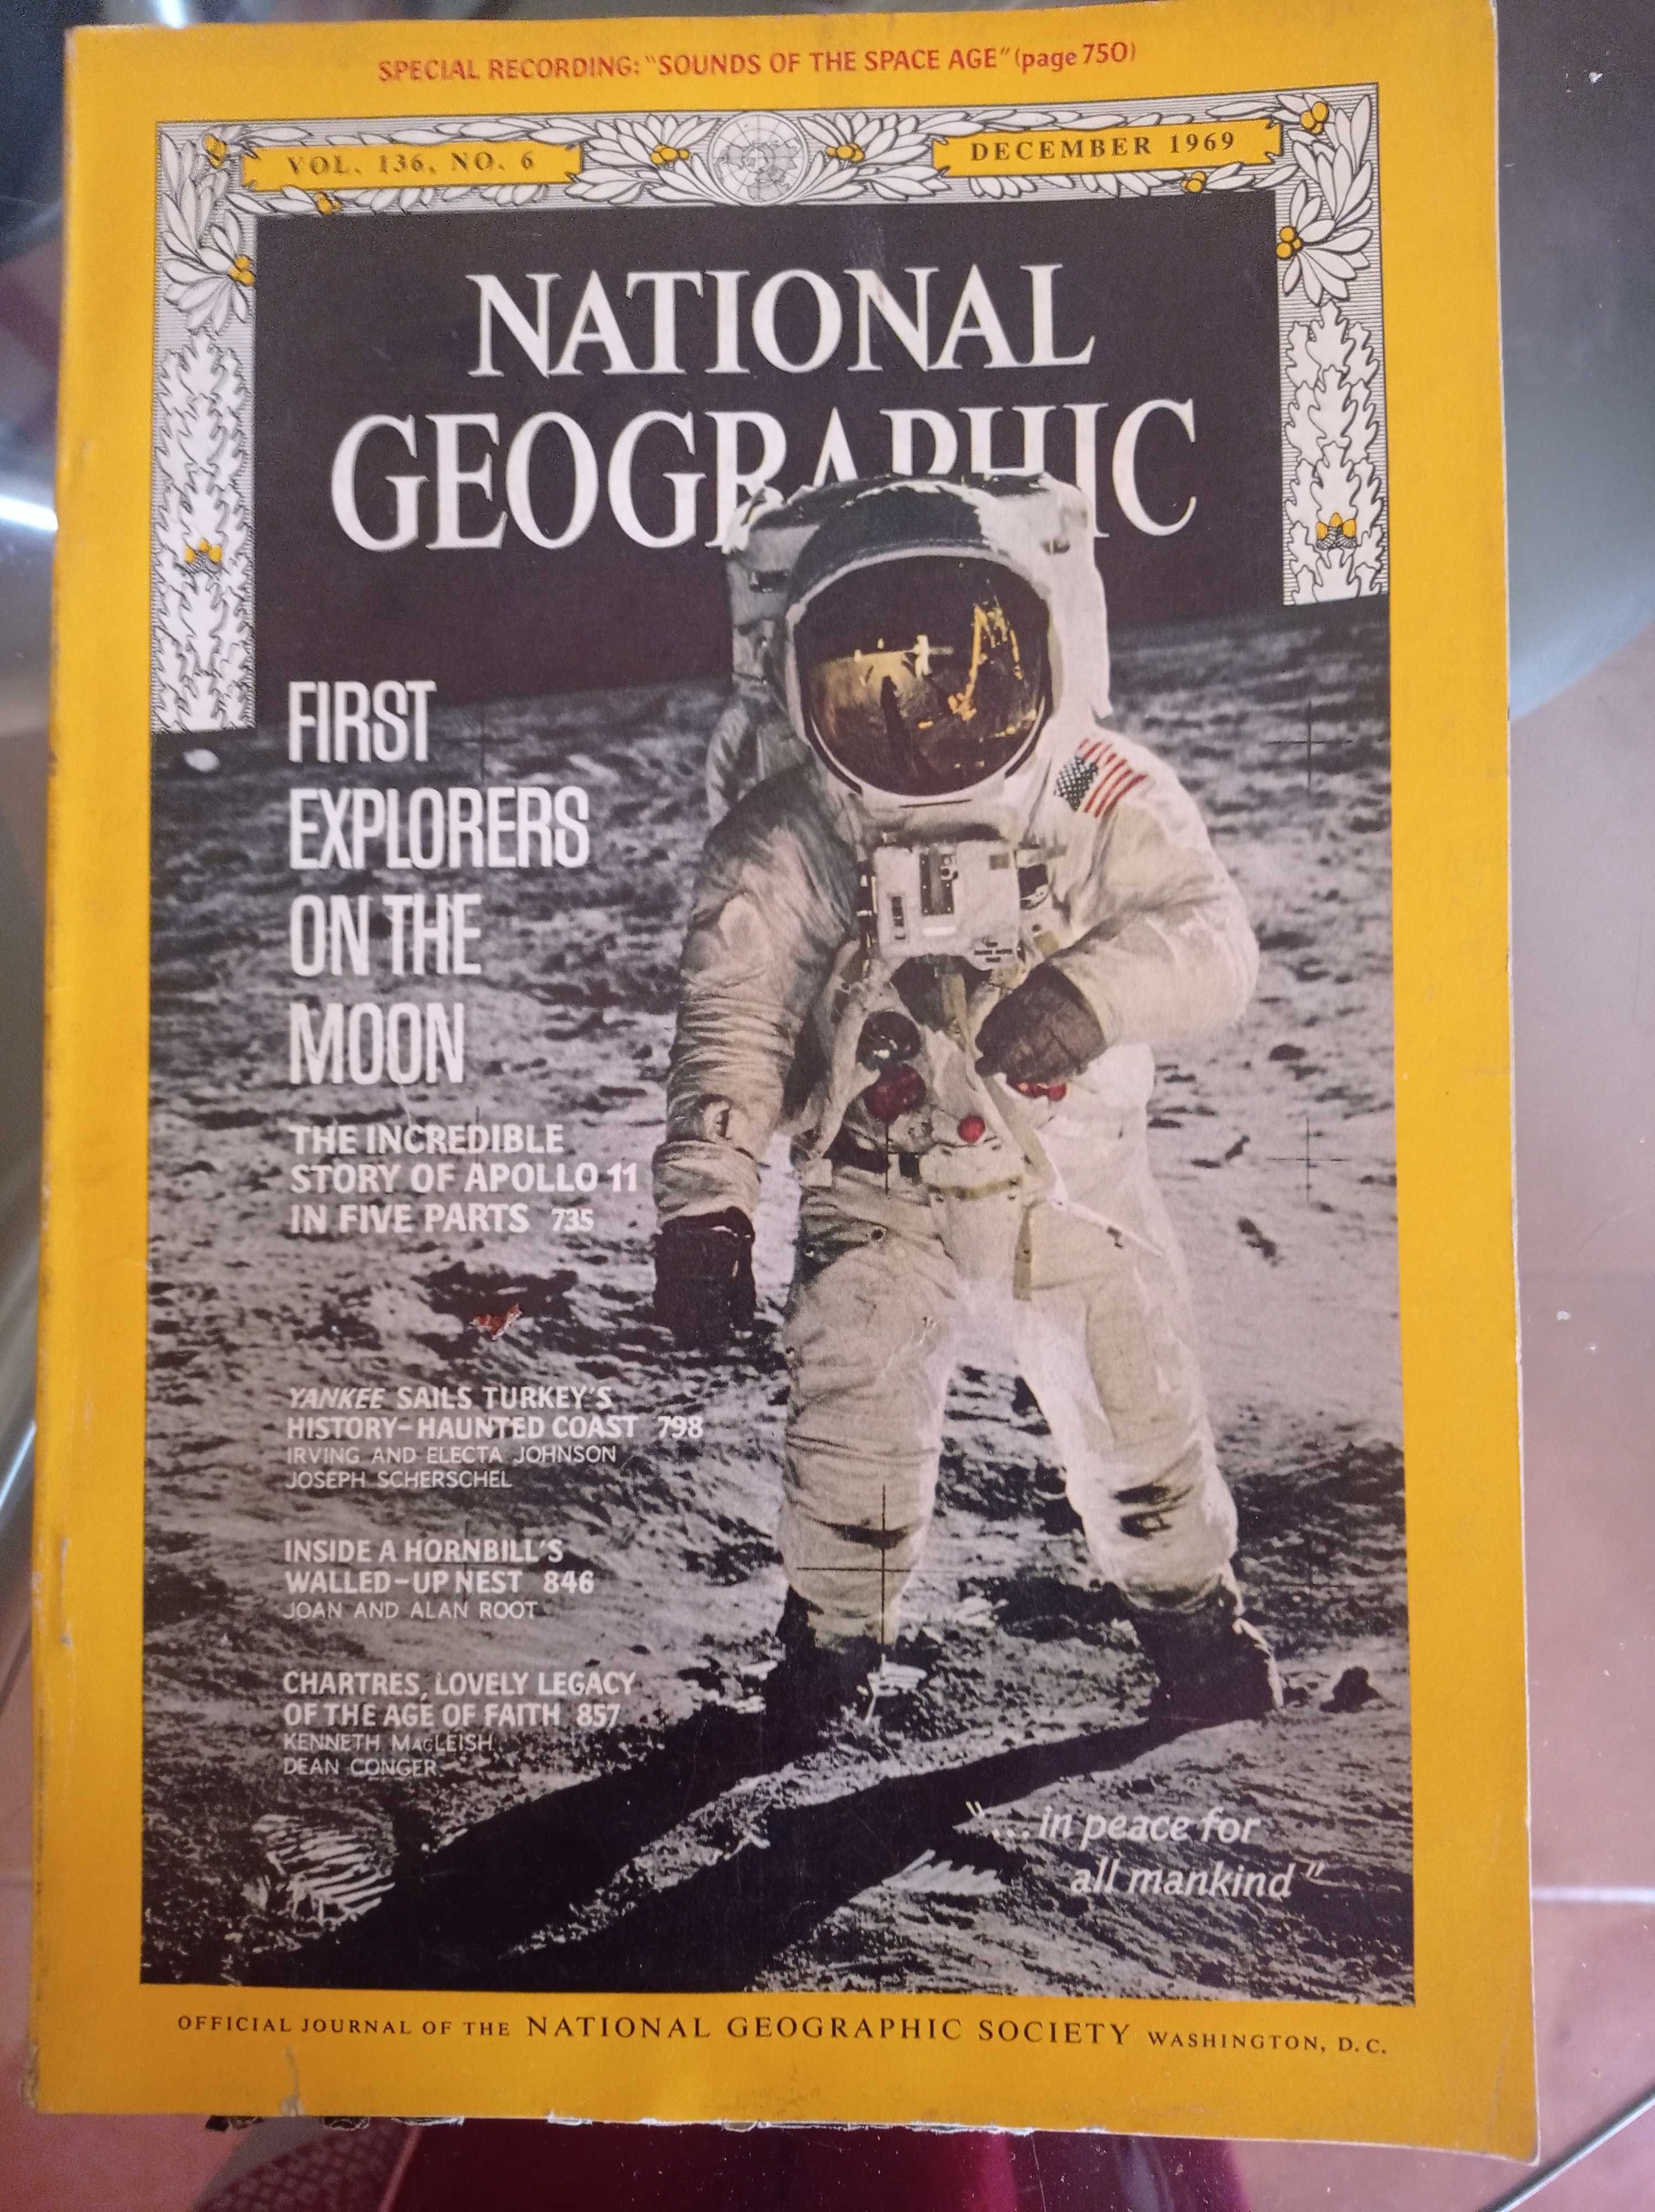 National Geographic 1969 First Explores on the Moon